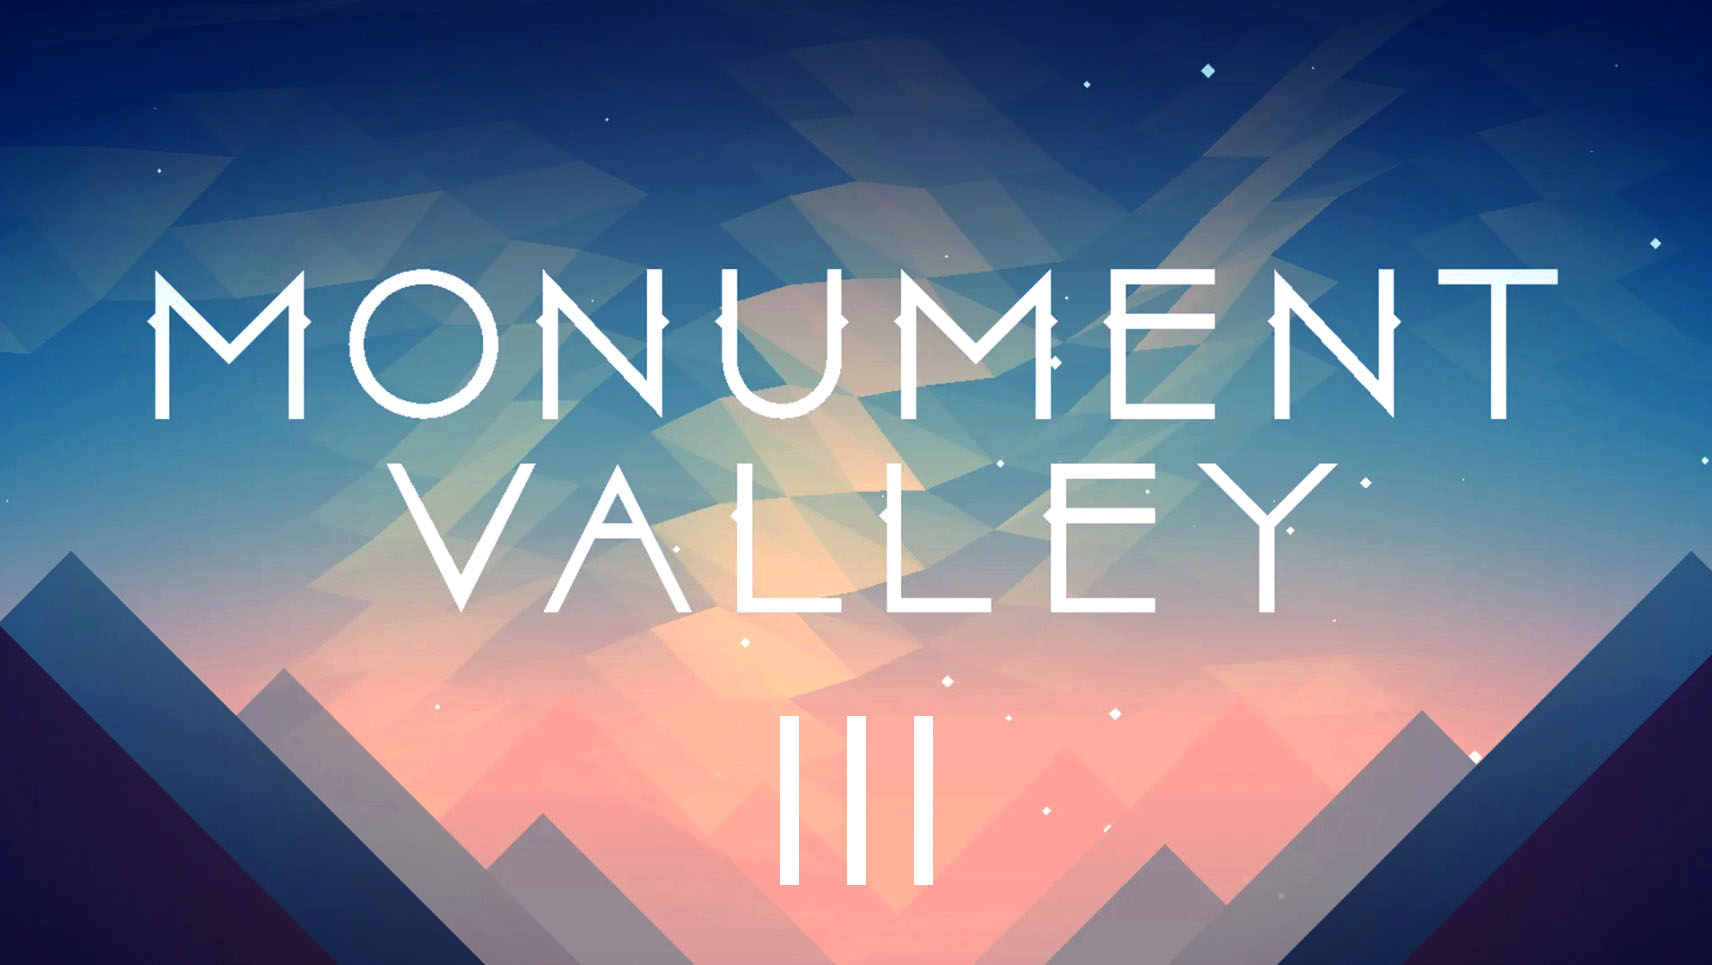 announcement monument valley 3